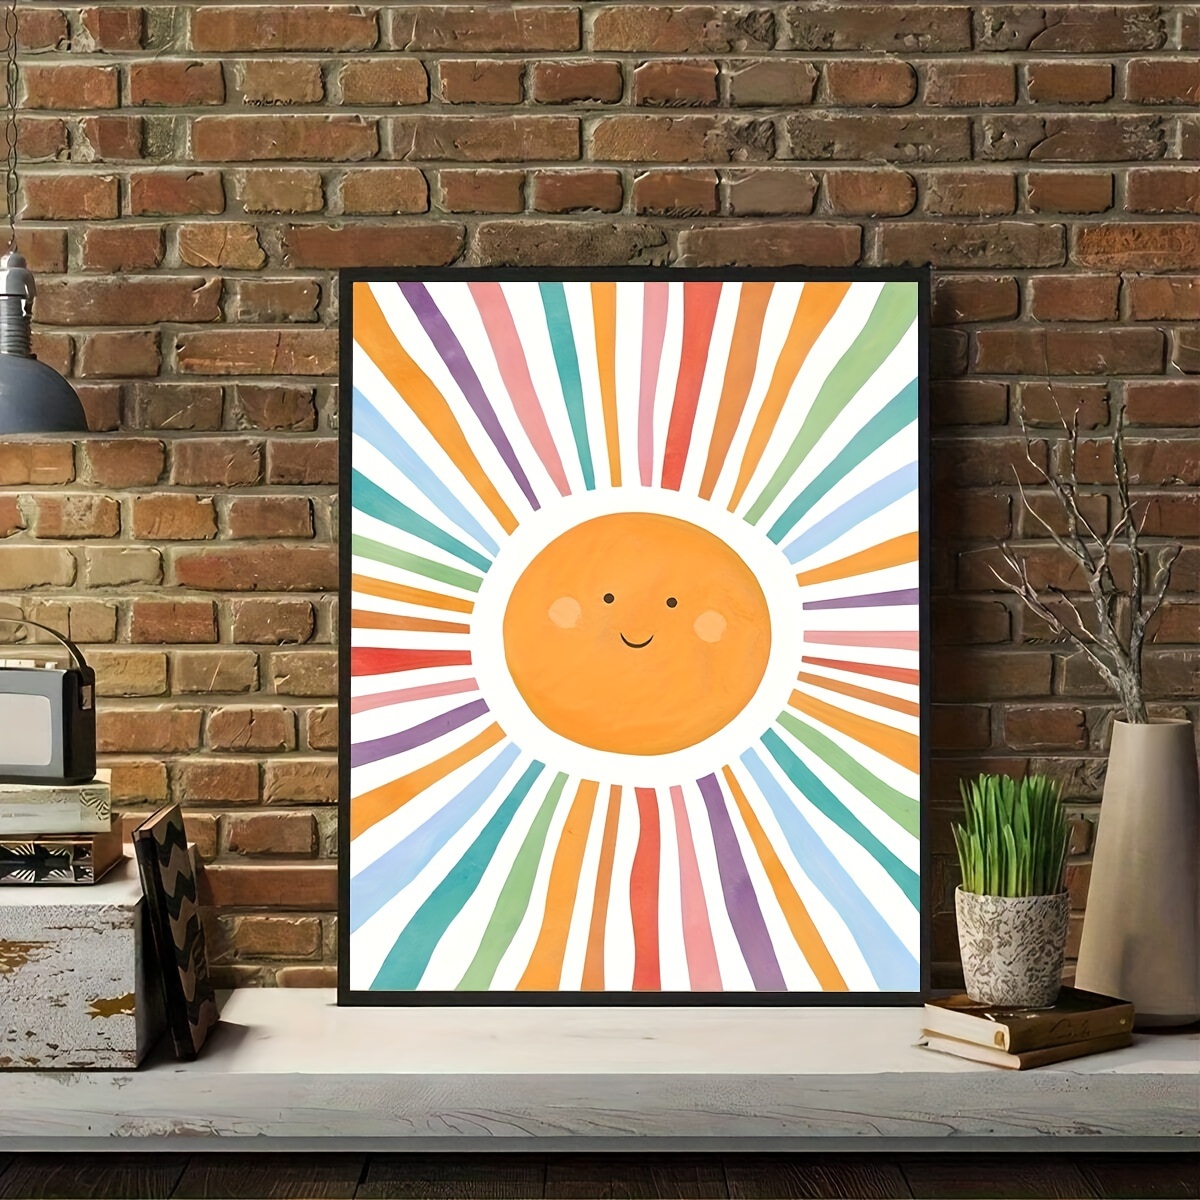 

The Sun Wall Art Painting, Various Color Sun Decor Picture, Children Room Wall Prints Canvas Painting, Bedroom Decor, As A Gift To Your Children That Is A Good Choice, Ready To Hang (has Framed)